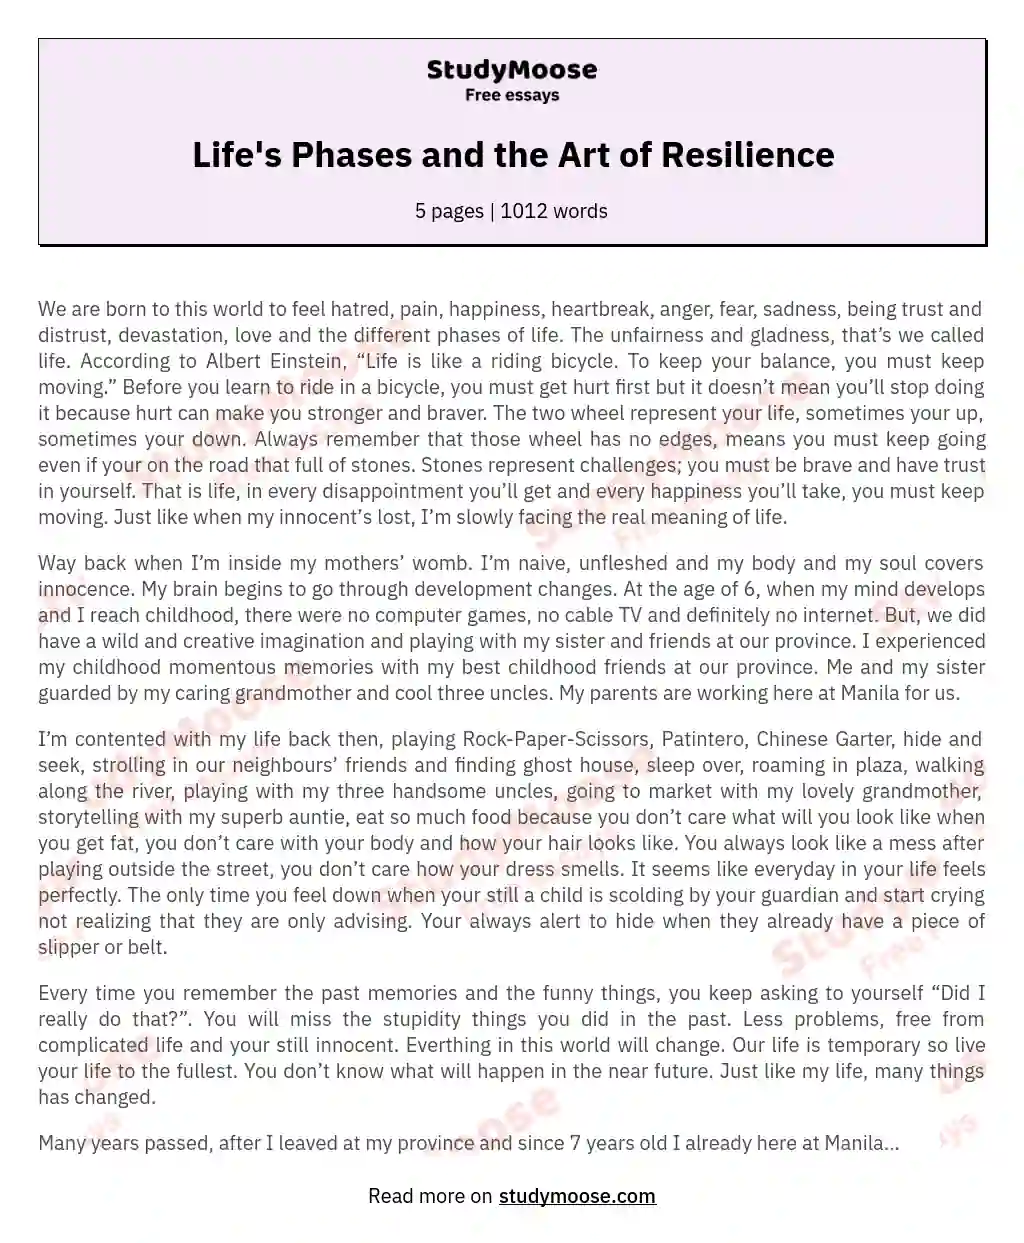 Life's Phases and the Art of Resilience essay